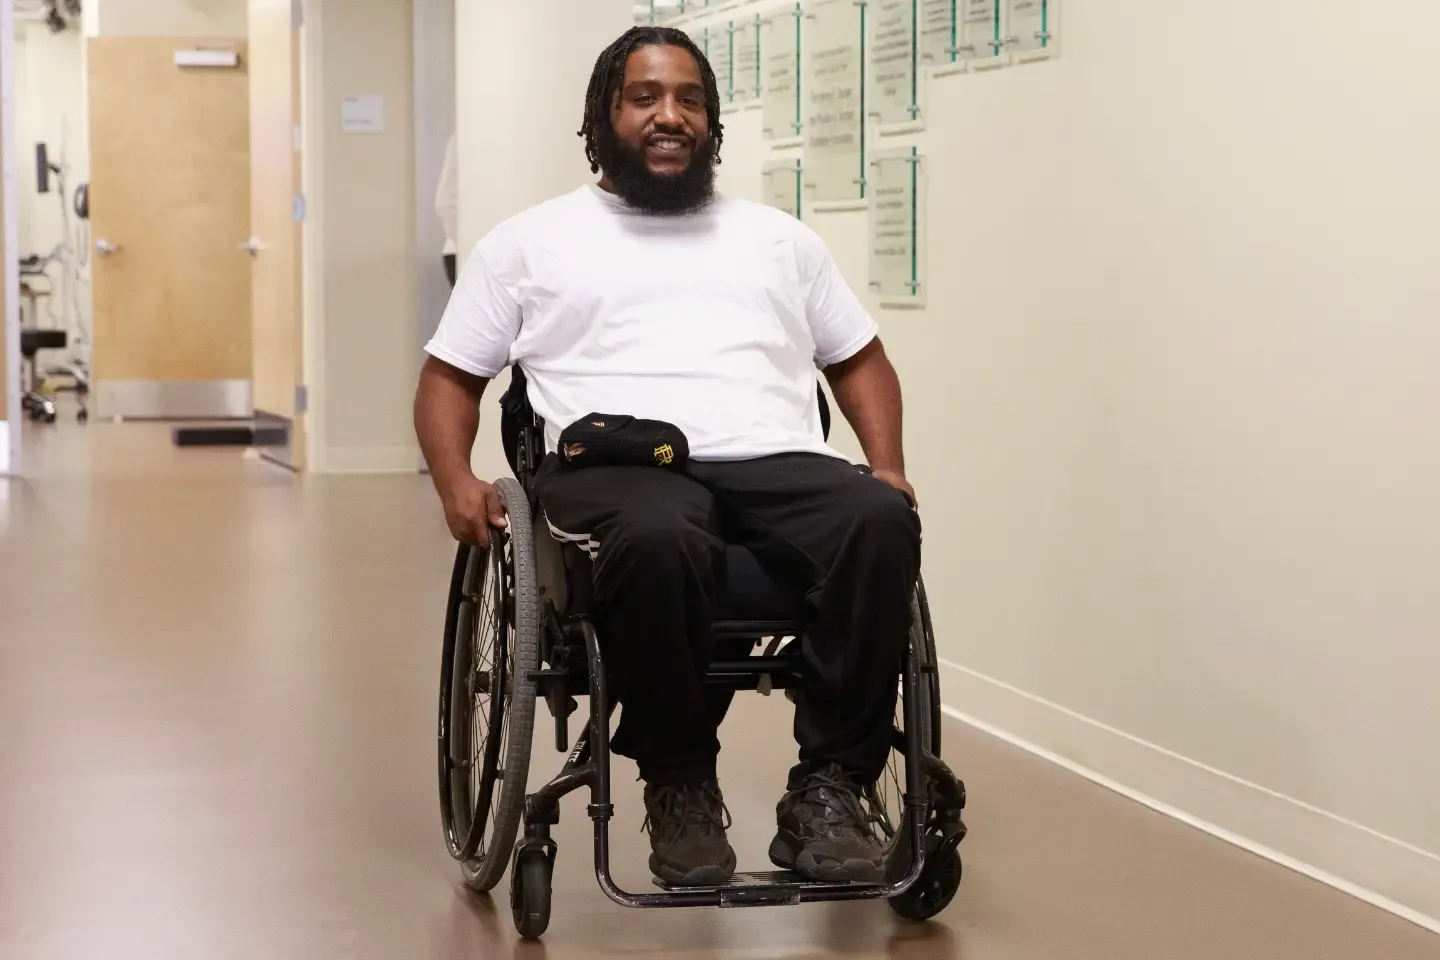 Black male in a wheelchair at a medical center